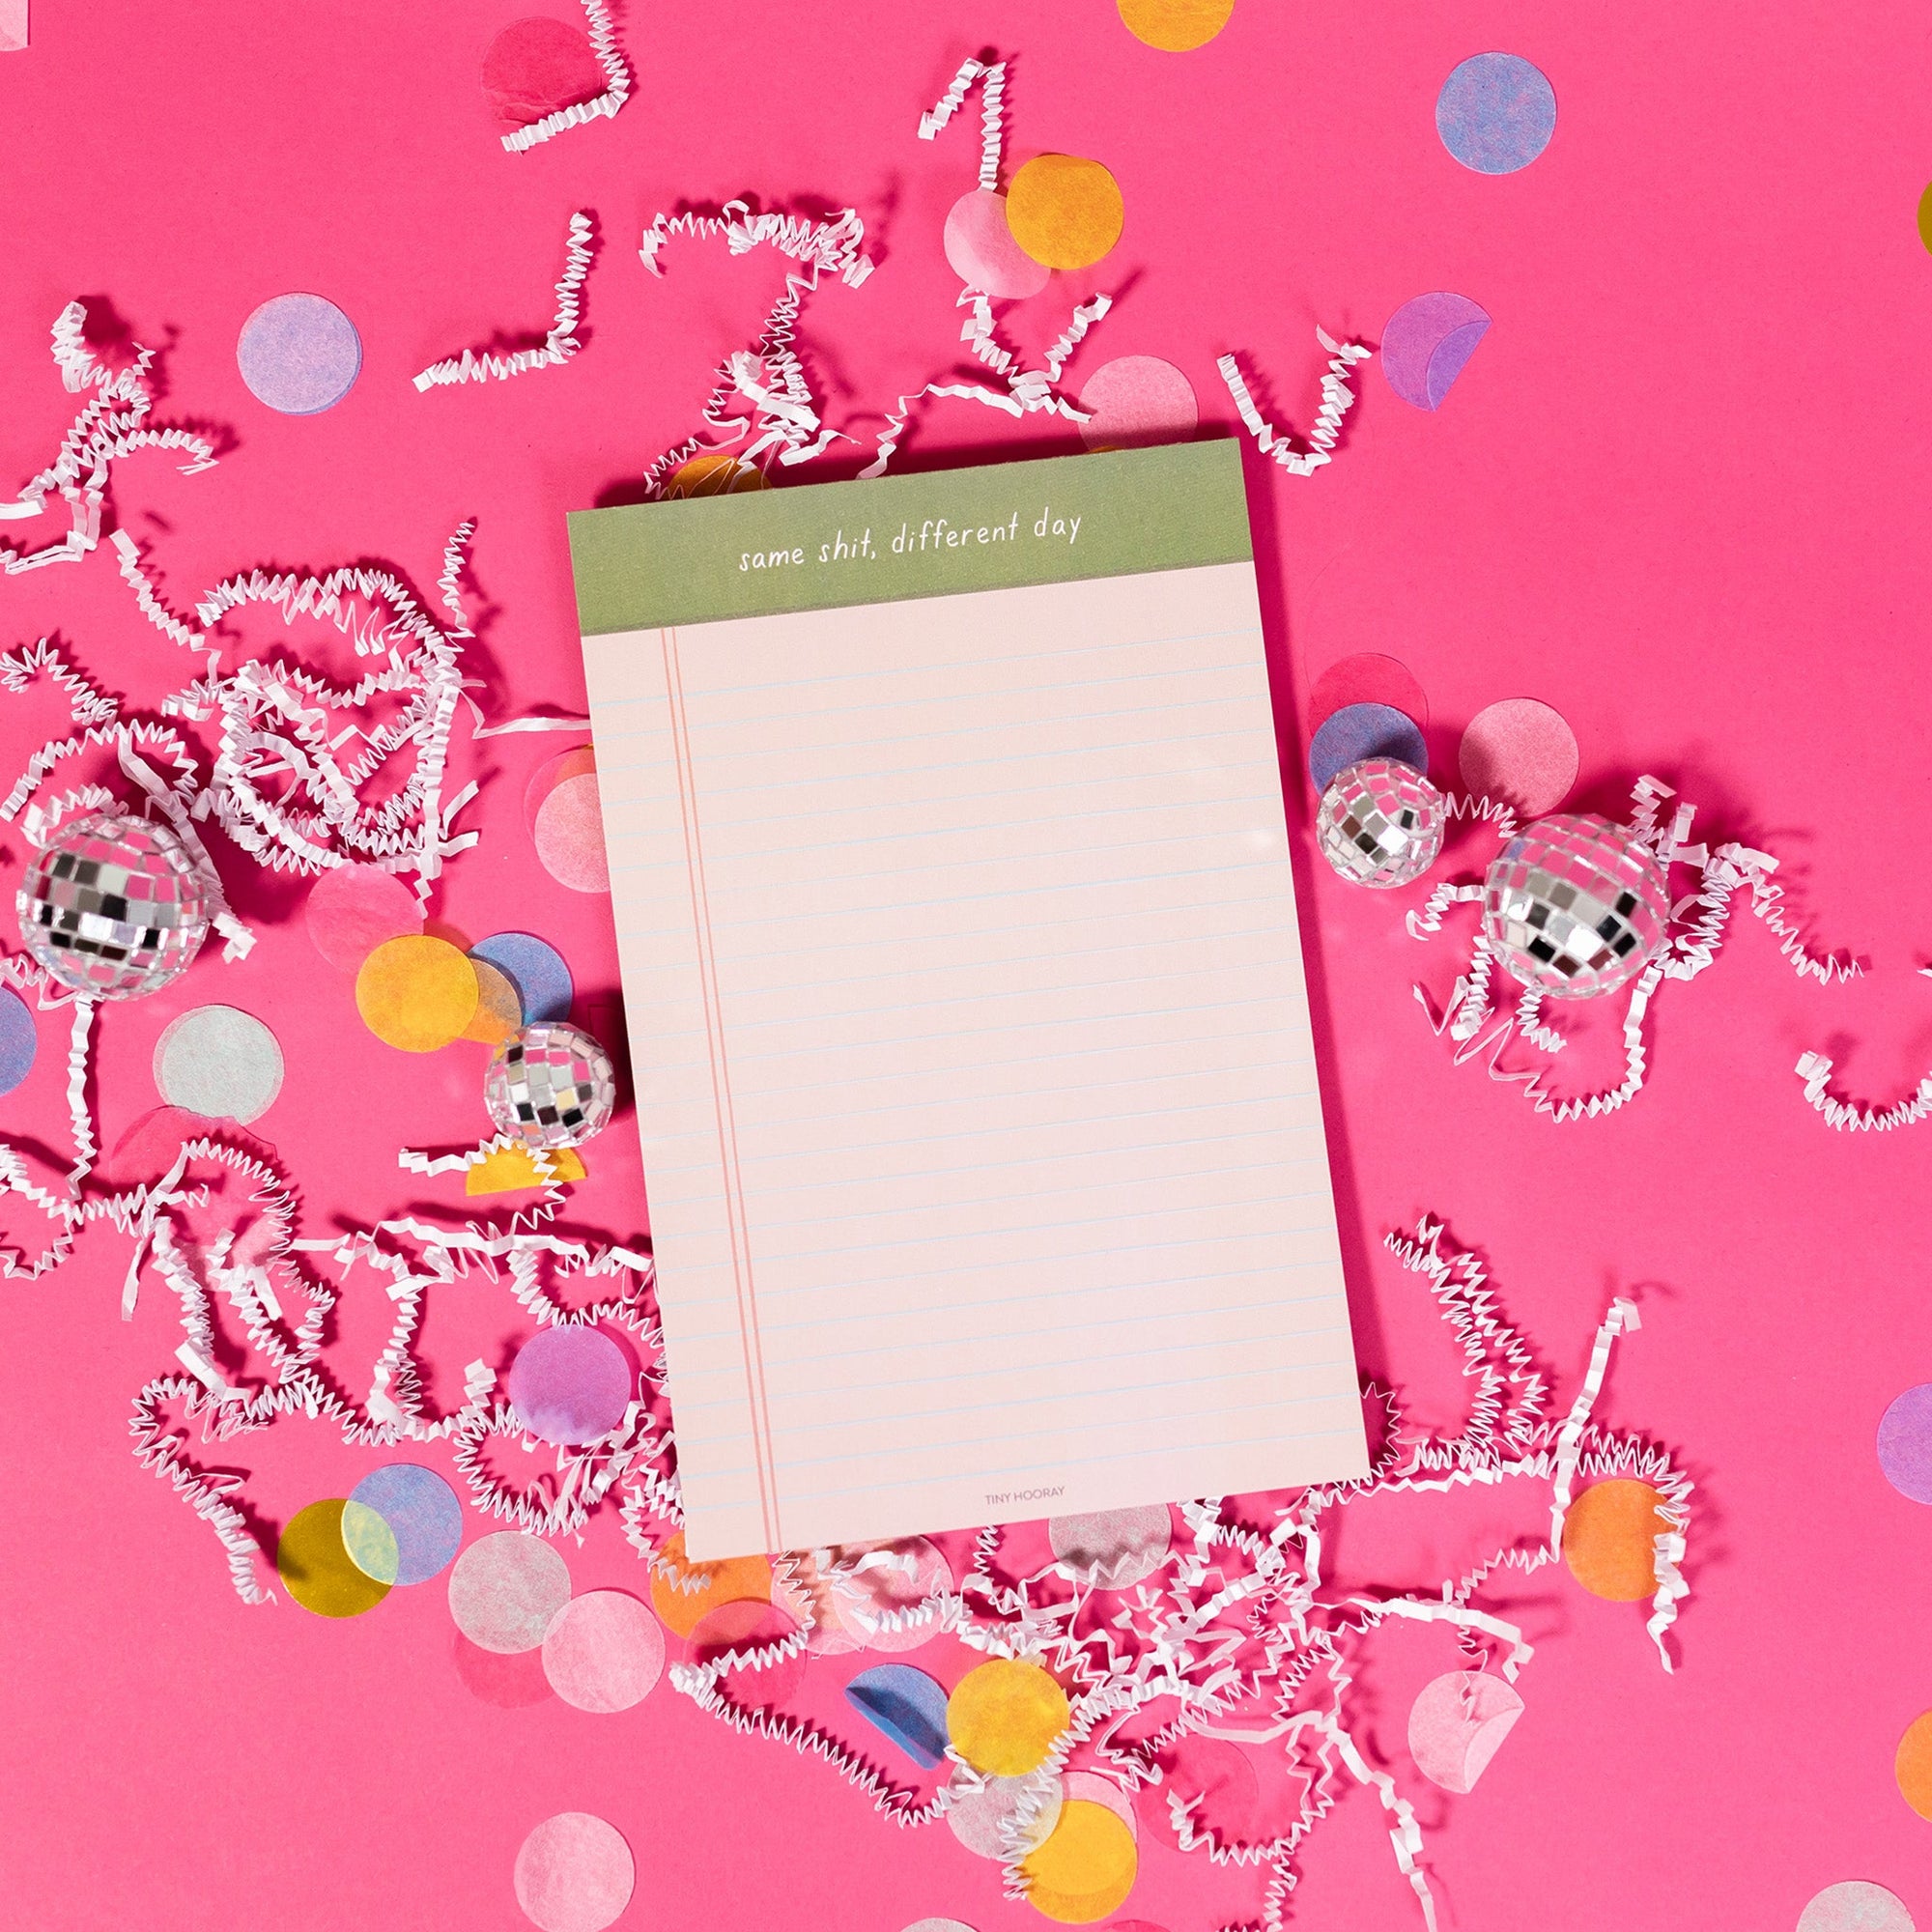 On a hot pink background sits a light pink notepad with white crinkle and big, colorful confetti scattered around. There are mini disco balls. It says "same shit, different day" at the top and has blue lines.